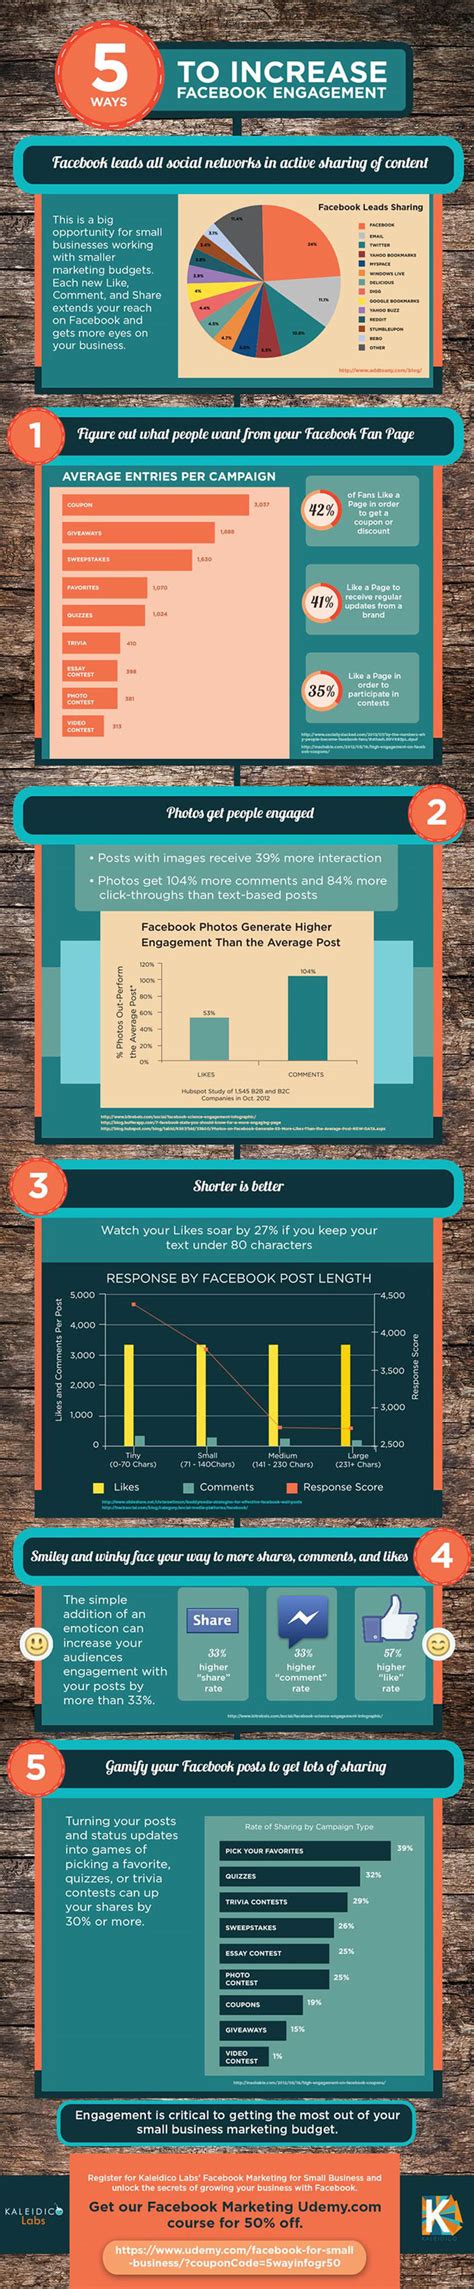 5 Clever Ways To Increase Facebook Engagement Infographic